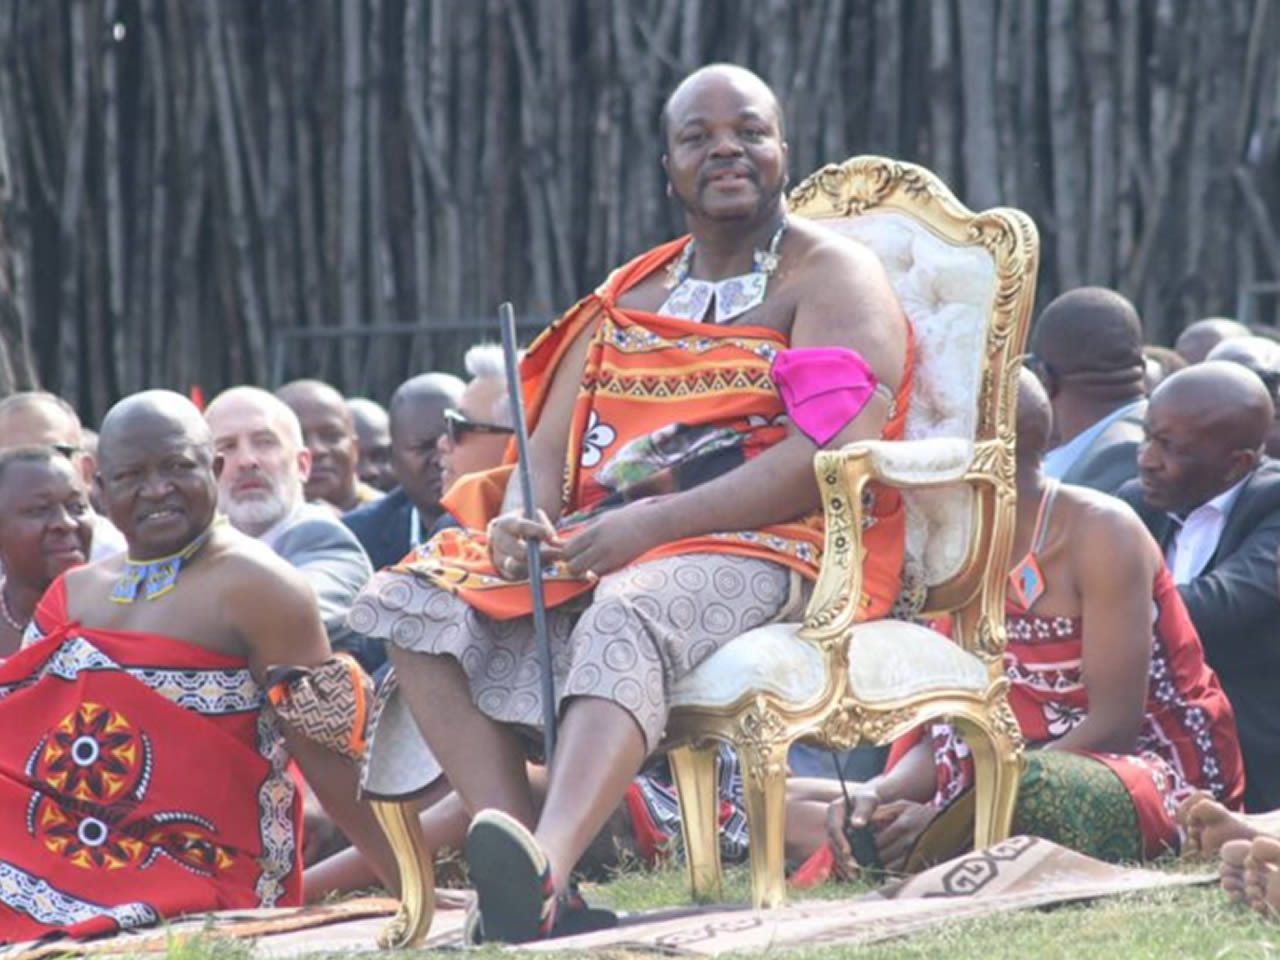 His Majesty King Mswati III officially opens the People's Parliament (Sibaya)